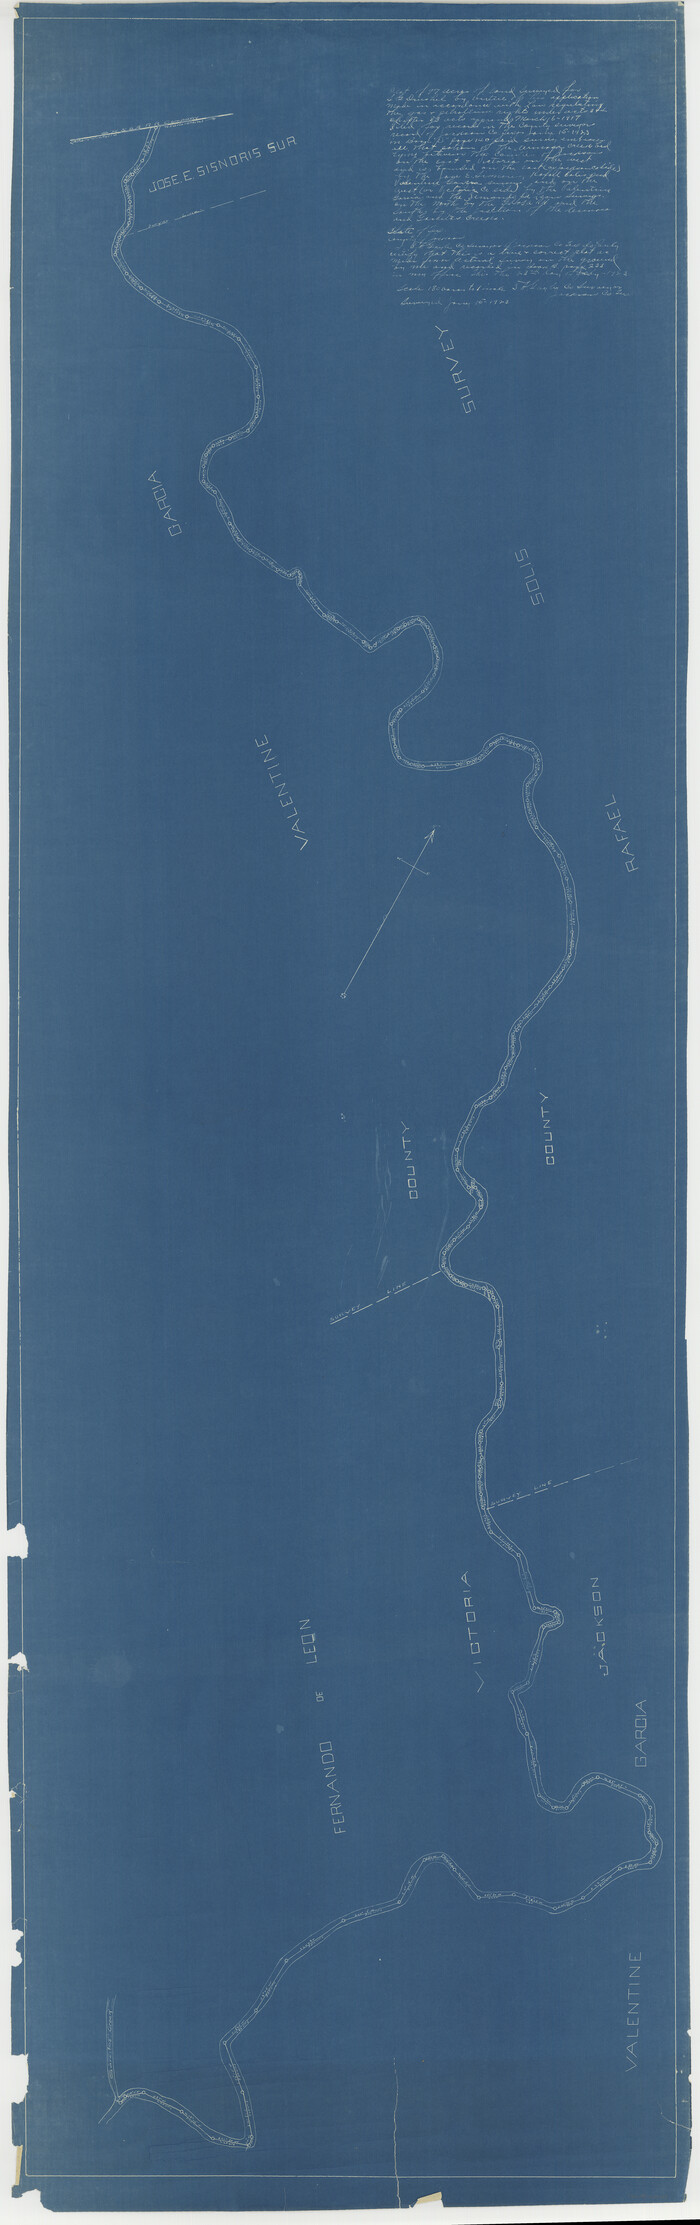 65647, [Sketch for Mineral Application 11318 - Arenosa Creek, S. G. Drushel], General Map Collection